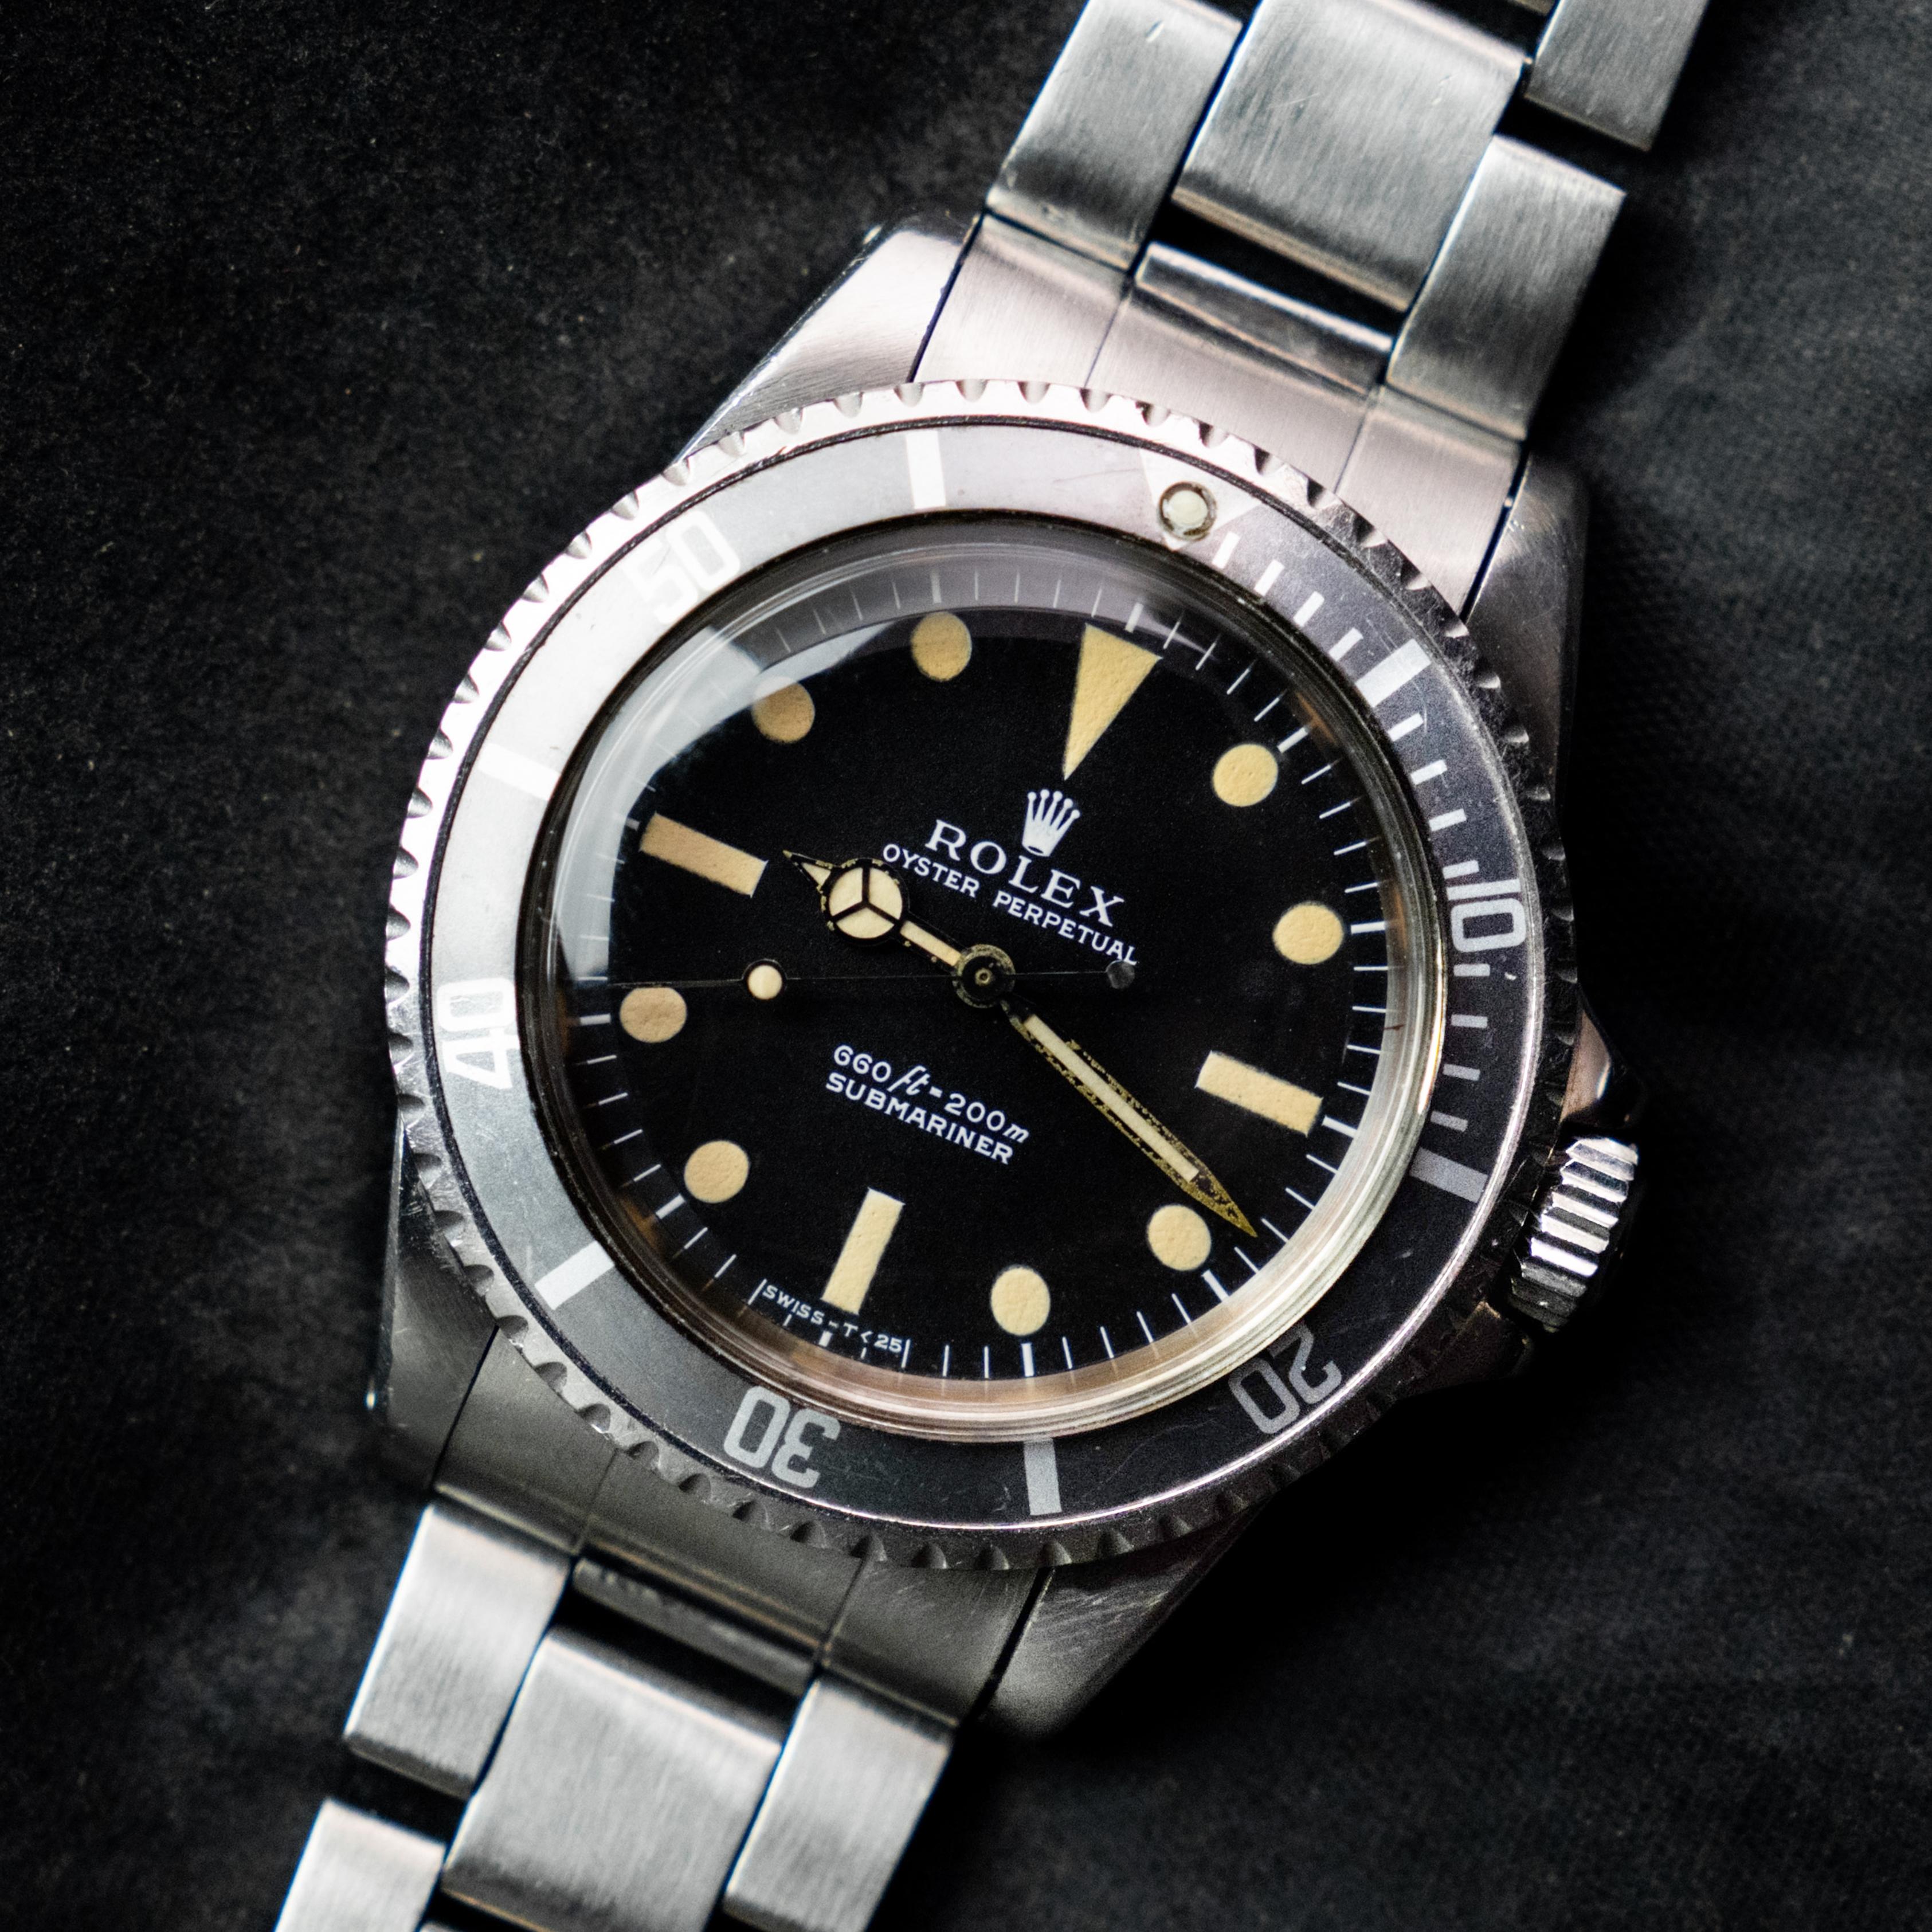 Brand: Vintage Rolex
Model: 5513
Year: 1968
Serial number: 24xxxxx
Reference: C03860; C03694

Case: Show sign of wear with slight polish from previous; inner case back stamped 5513 IV.68

Dial: Excellent Aged Condition Matte Dial where the lumes